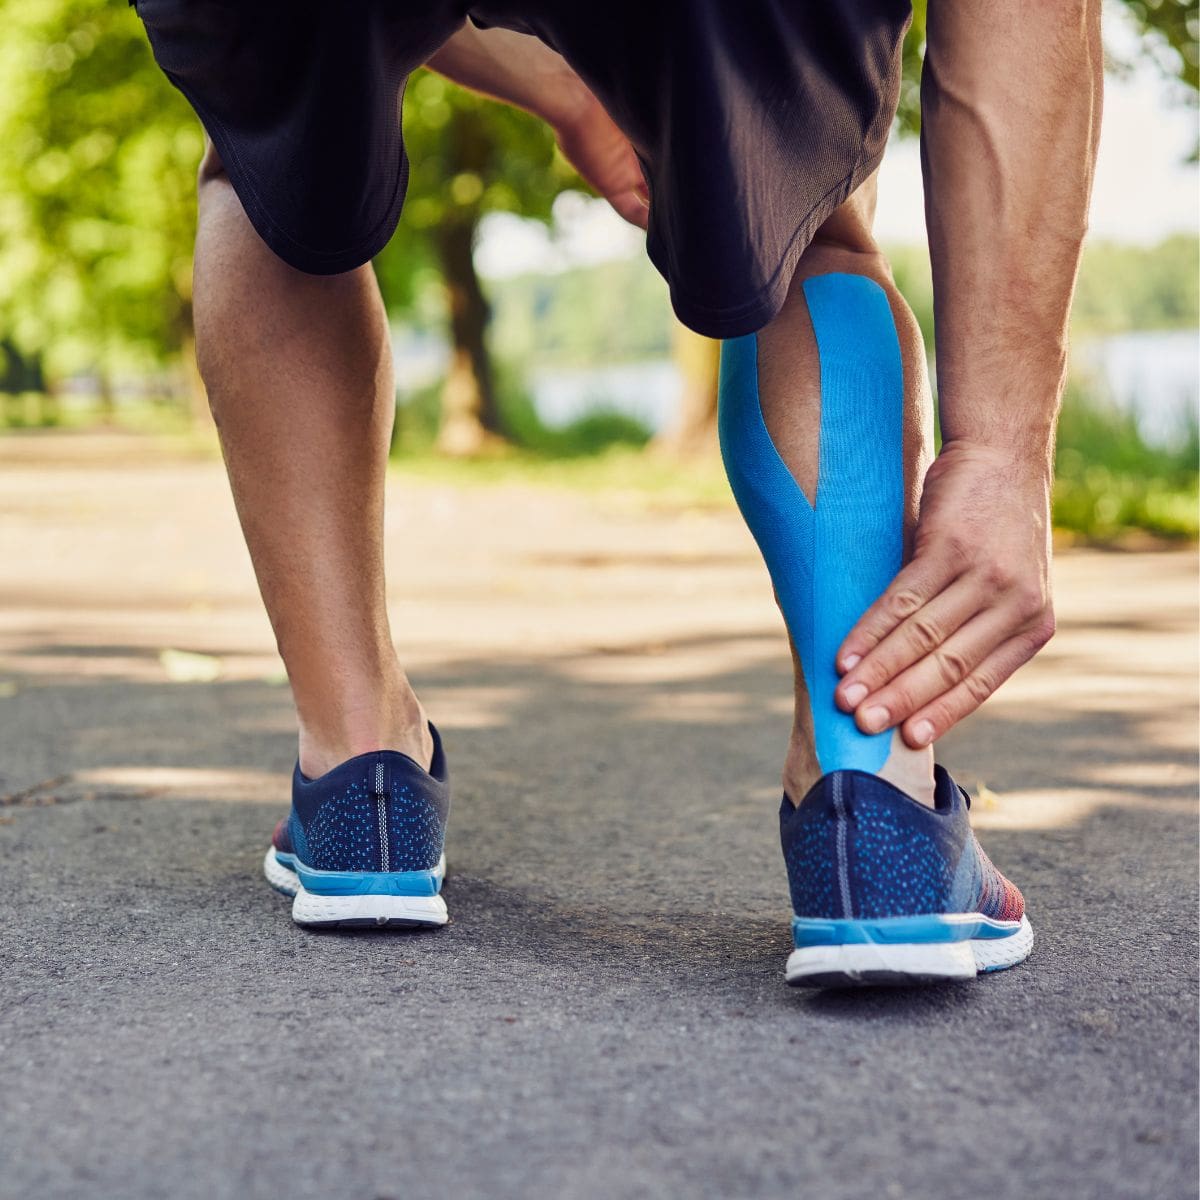 Taping For Achilles Tendonitis: Here’s How to Do It Properly